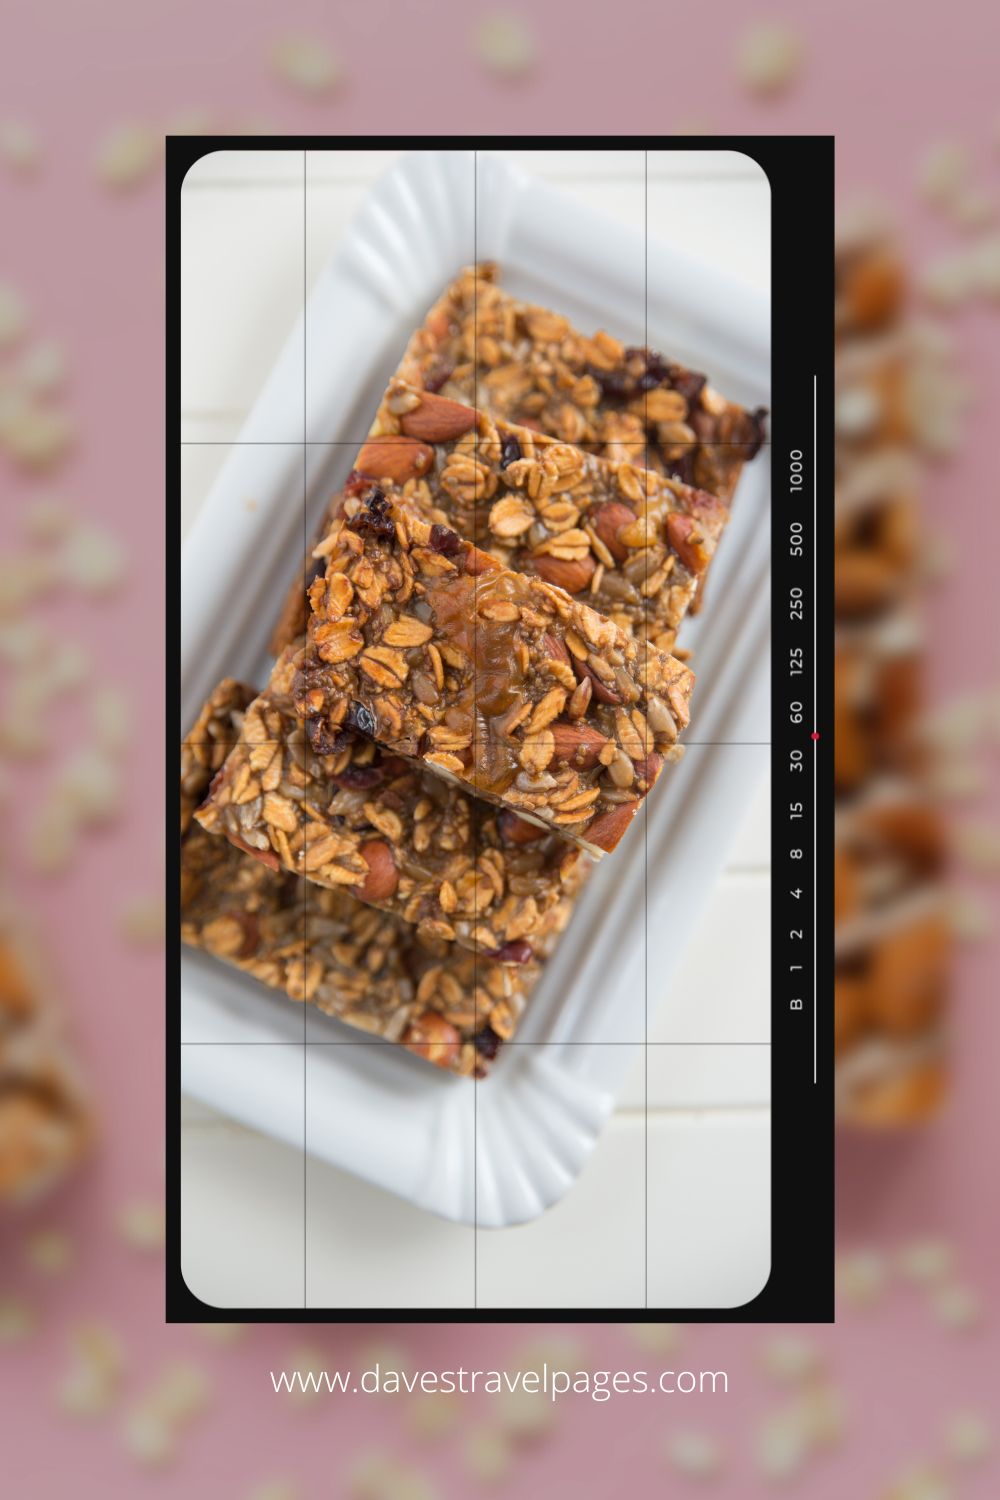 Pack Granola bars for your next road trip